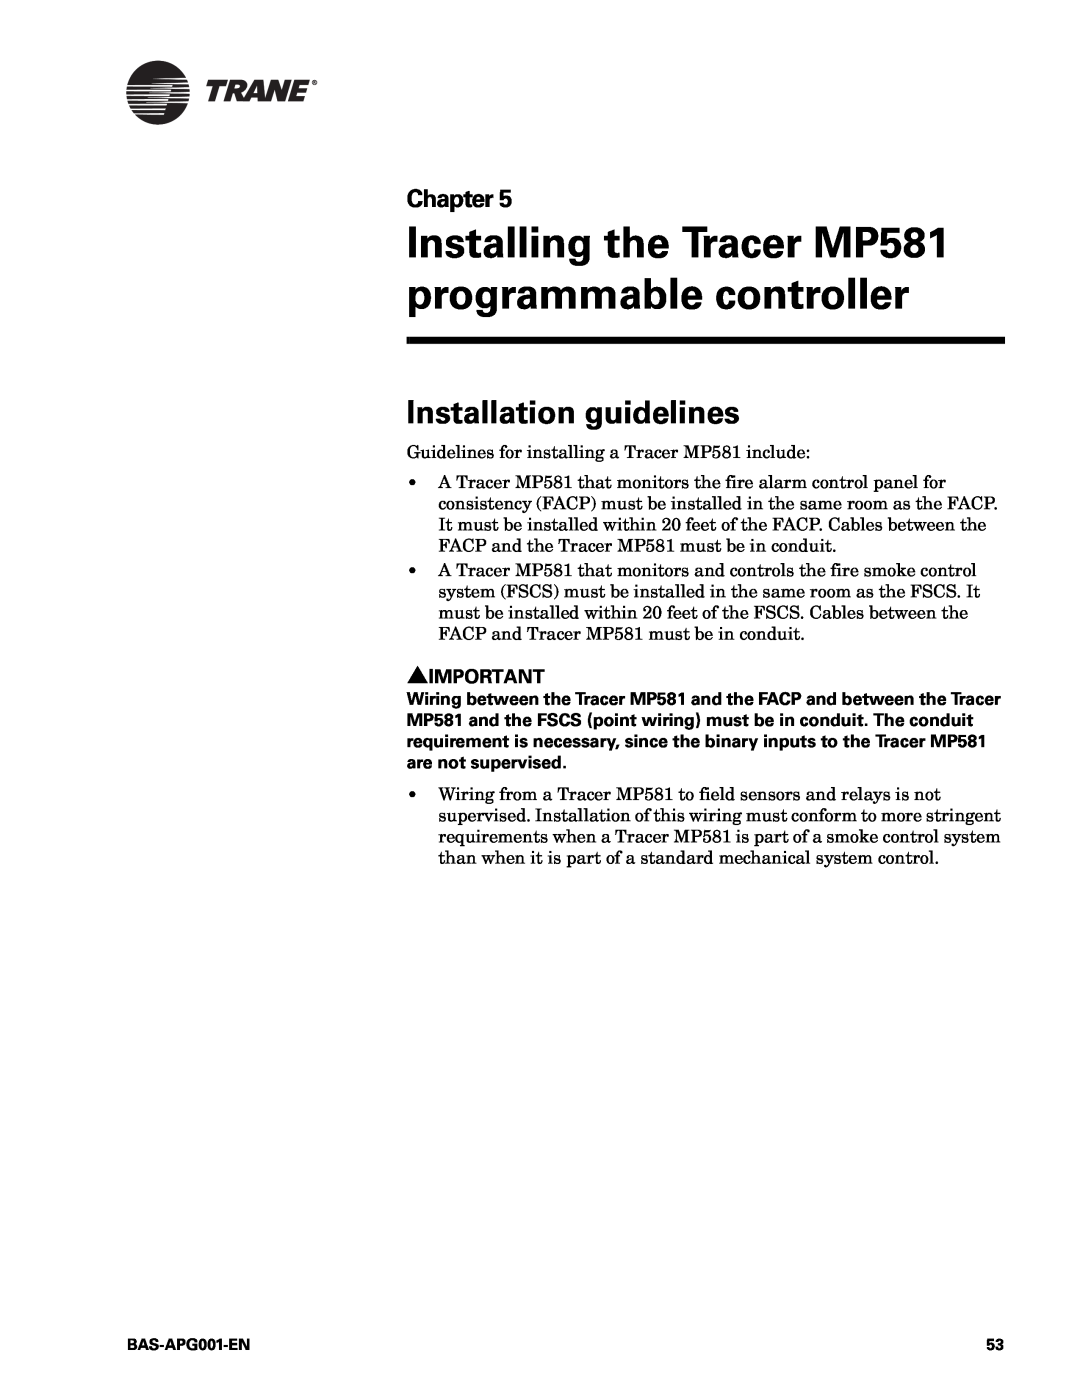 Trane Engineered Smoke Control System for Tracer Summit, BAS-APG001-EN manual Installation guidelines 